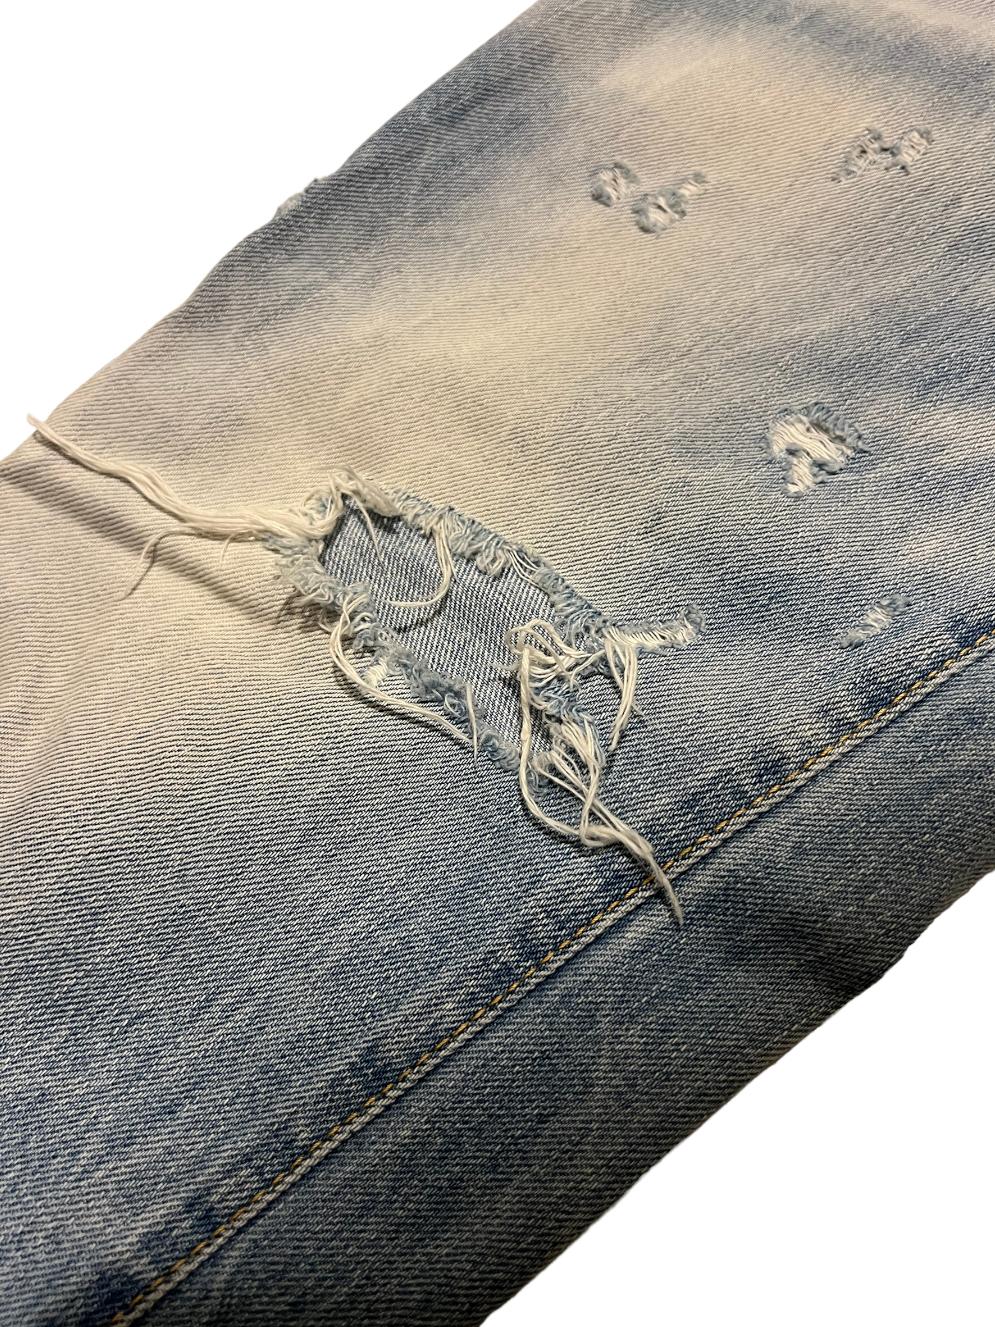 - Low raise
- Light denim wash
- Distressed style
- Straight leg fit
- Cropped detail
- Made in Italy